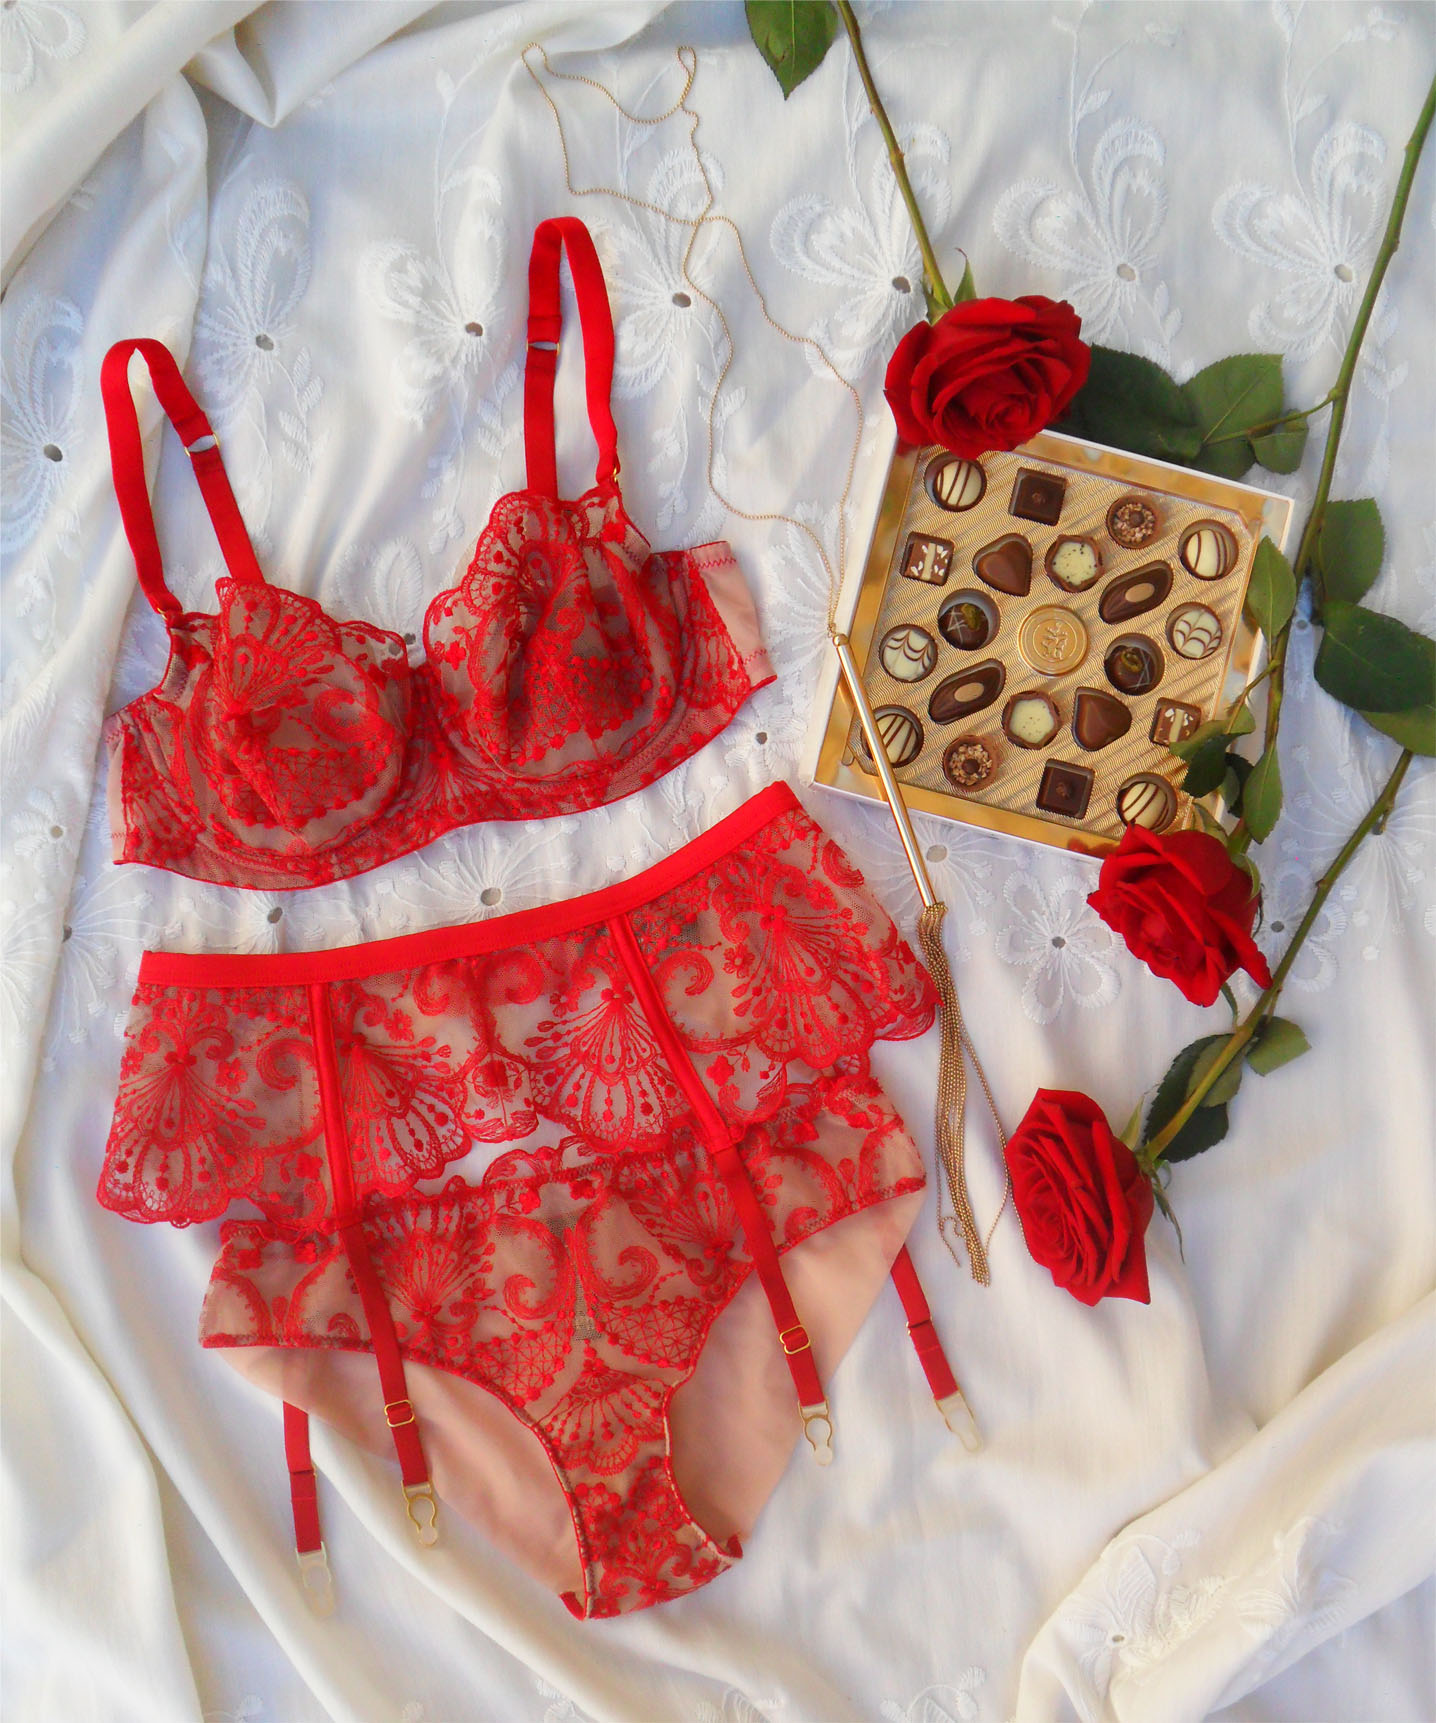 https://estylingerie.com/wp-content/uploads/2021/08/TeAmore-luxury-large-cup-size-lingerie-review-red-embroidery-bra-set-low-res.jpg